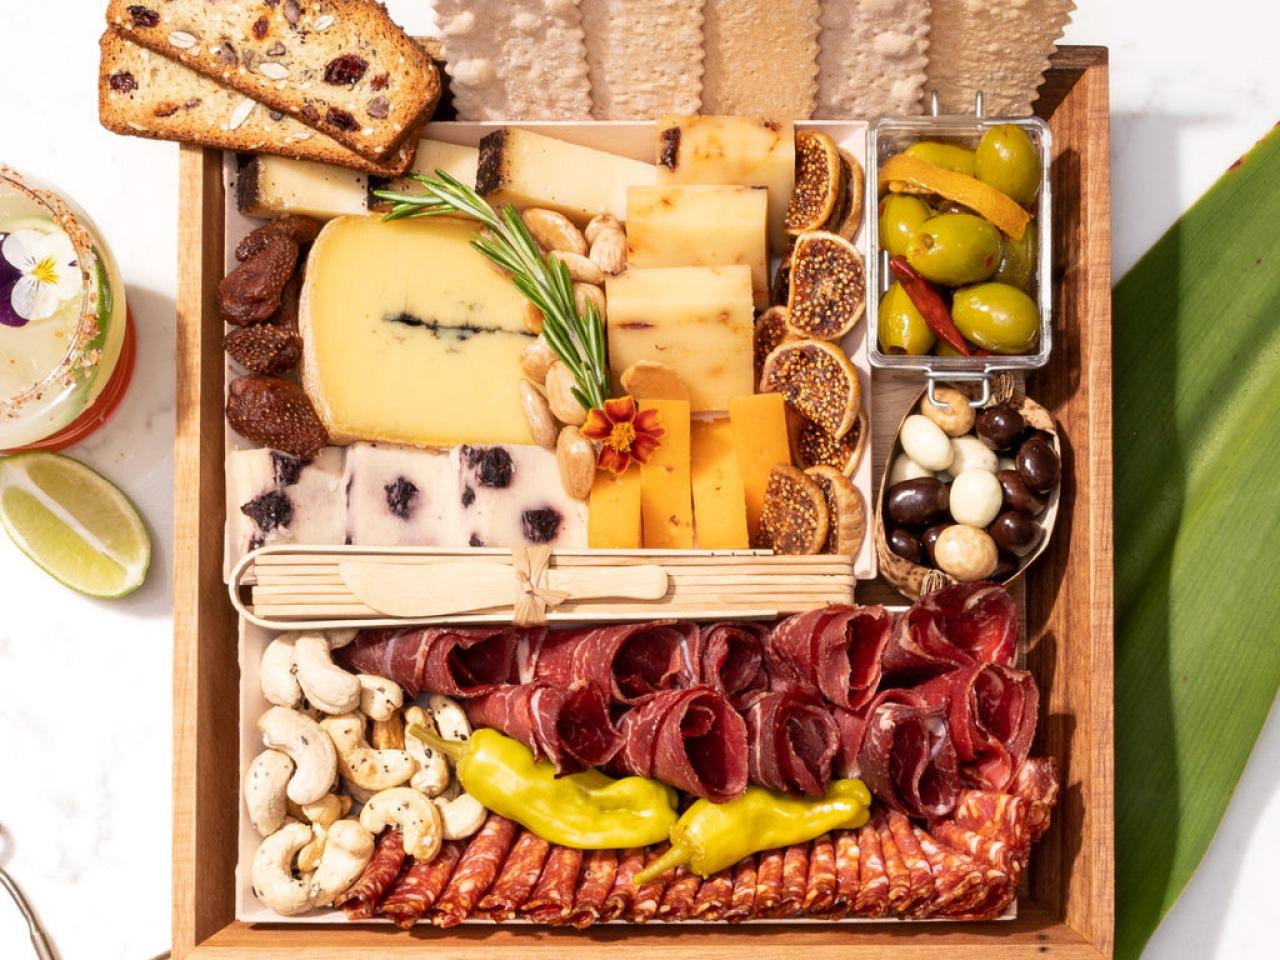 https://food.fnr.sndimg.com/content/dam/images/food/products/2022/10/26/rx_ciccetti-cheese--charcuterie-board.jpeg.rend.hgtvcom.1280.960.suffix/1666765734835.jpeg